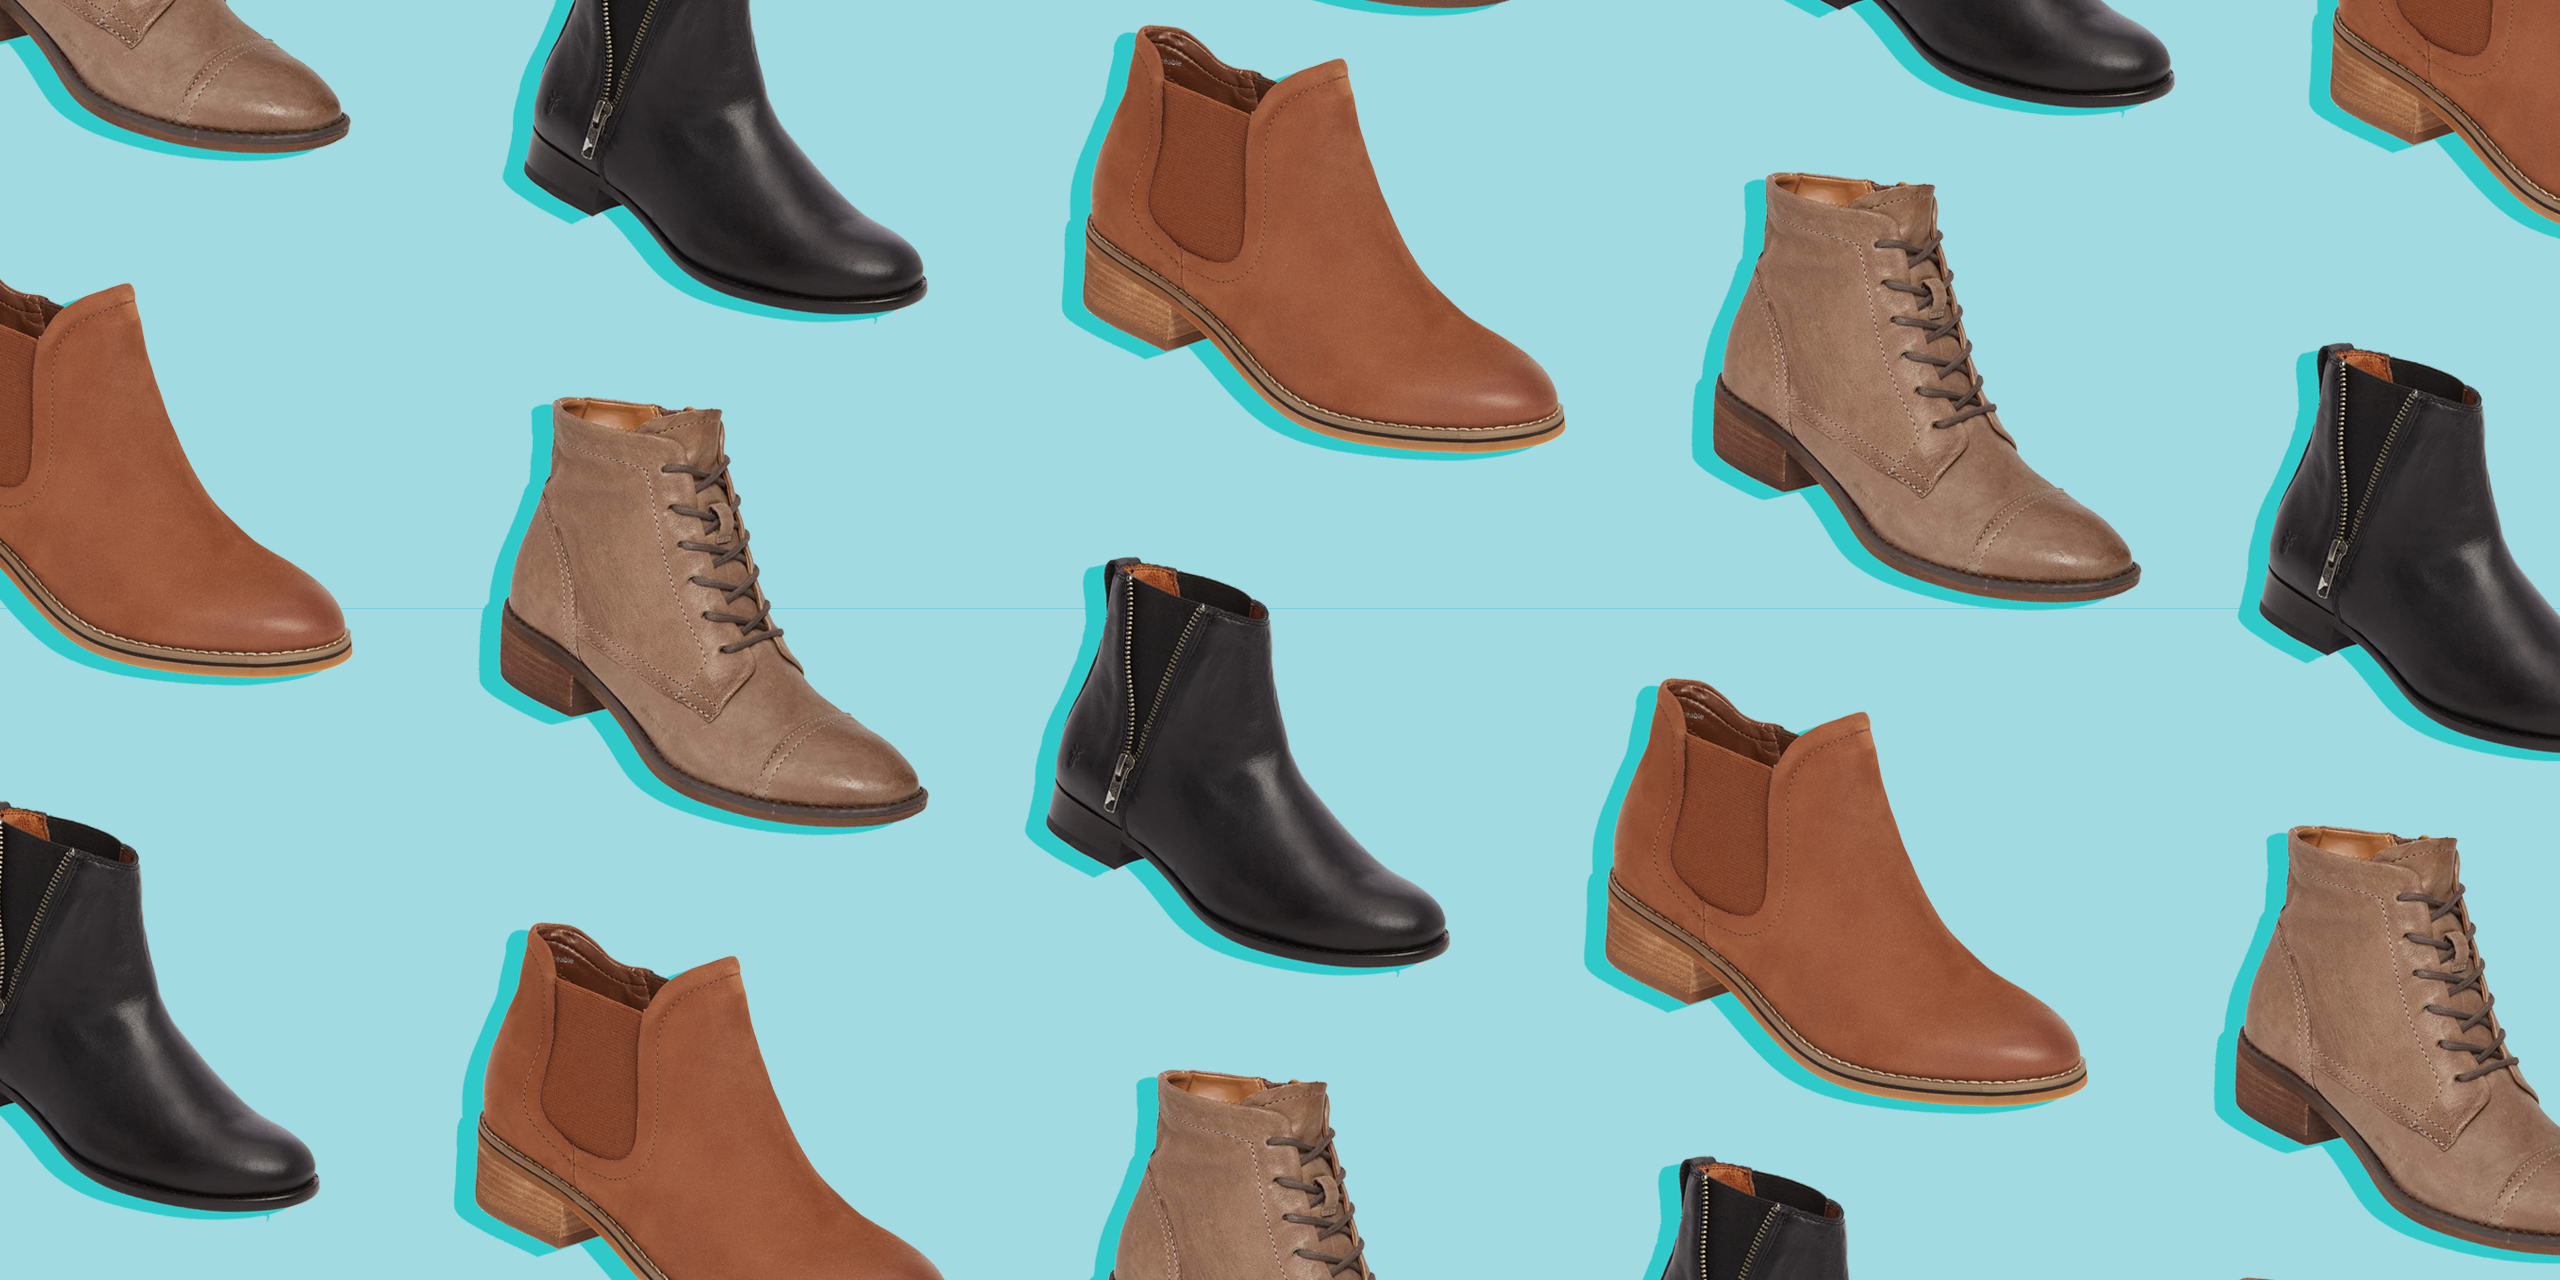 Most Comfortable Ankle Boots for Women 